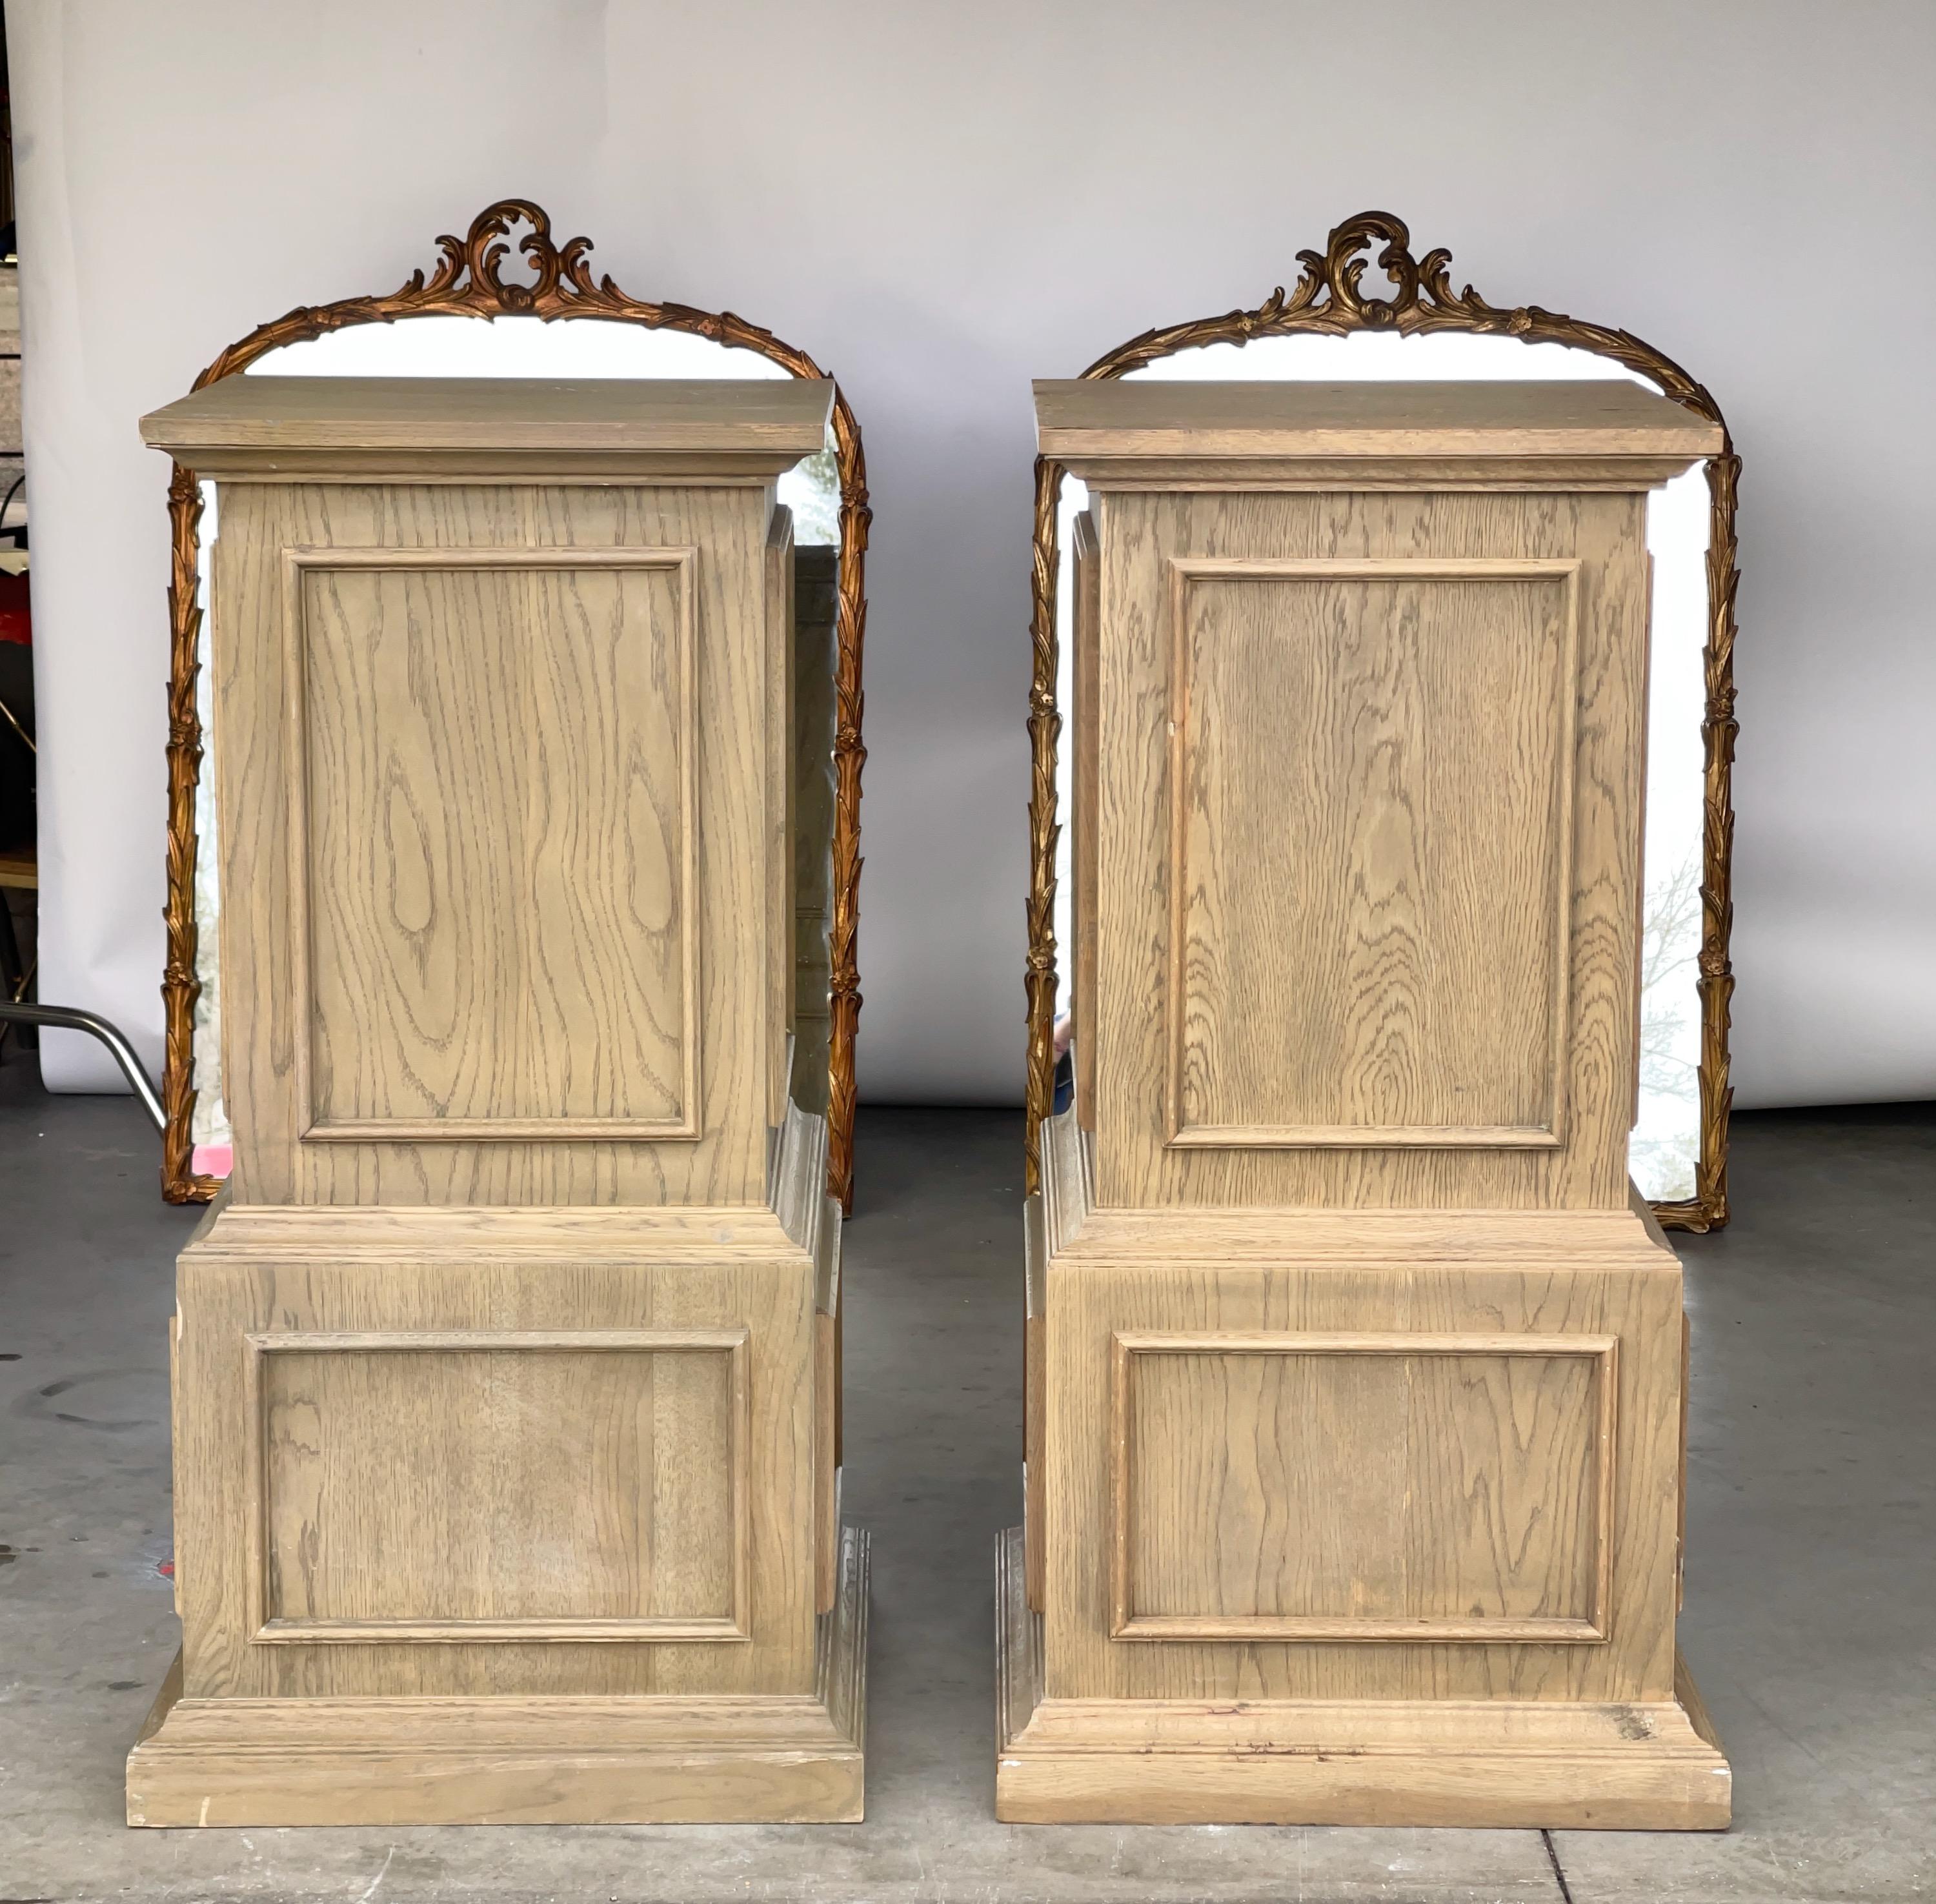 Pair of stained wood display pedestals retailed by Restoration Hardware circa 1993. Decorated on four sides with square moldings.
42 inches high by 22 inches wide by 22 inches deep. 19.75 inches square in center.